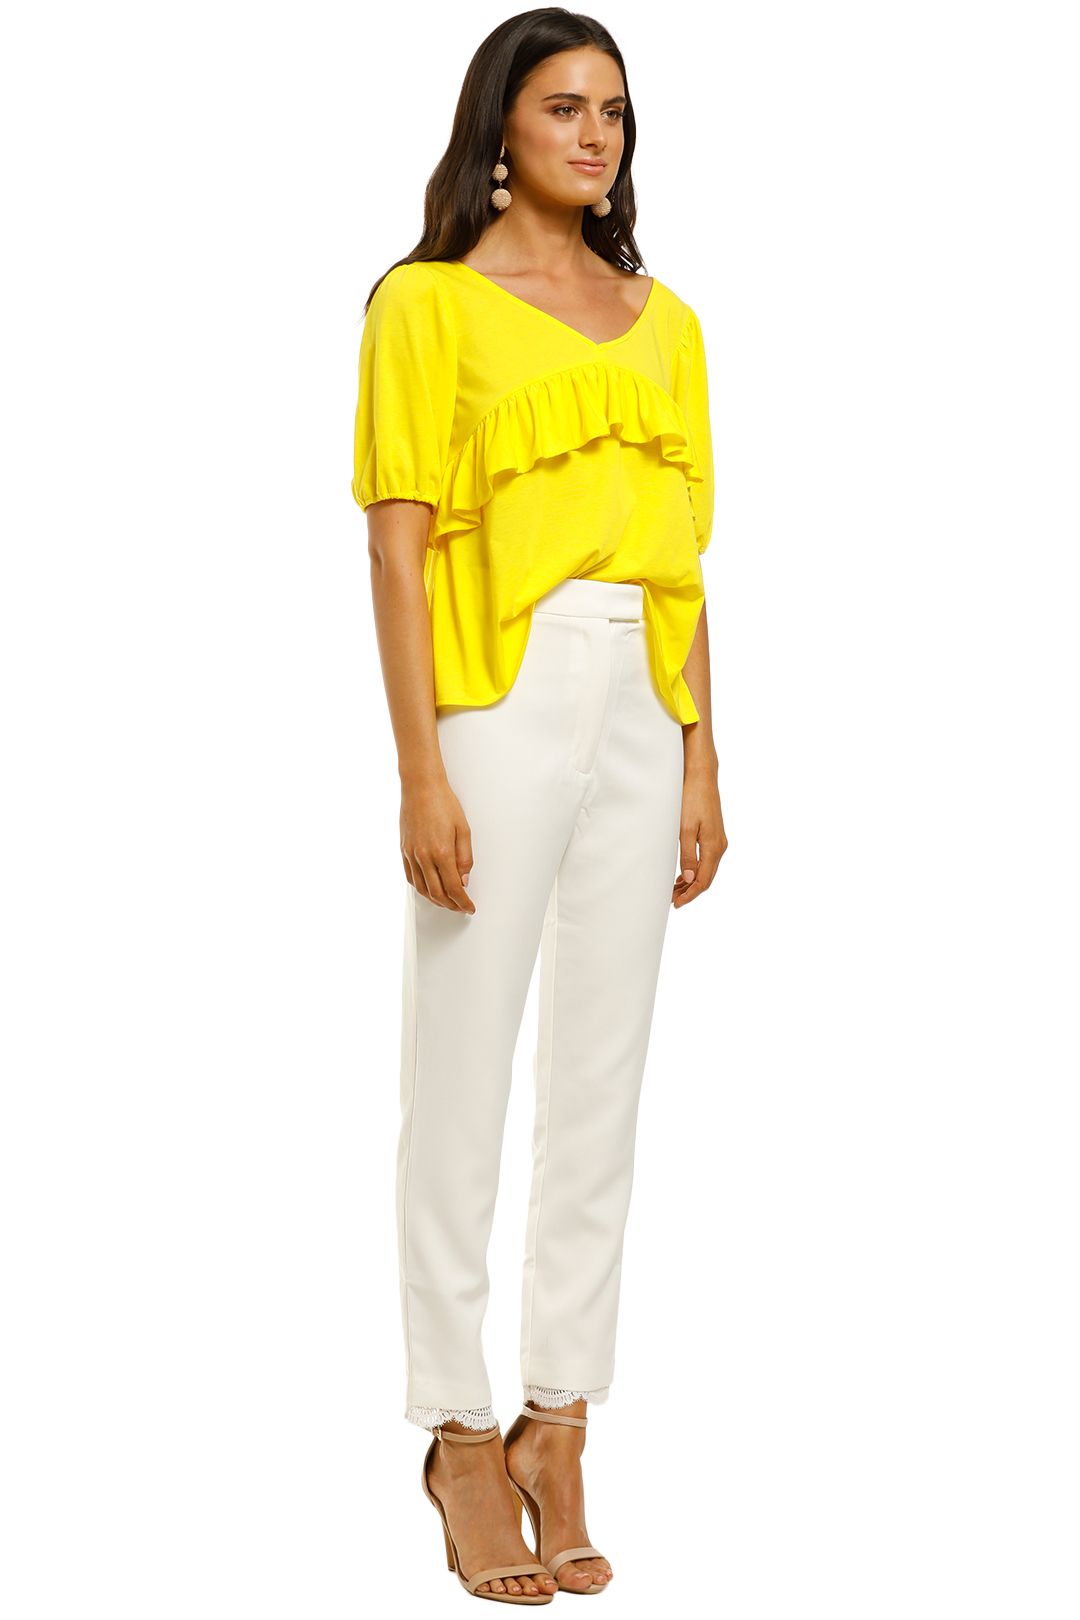 Coop-by-Trelise-Cooper-Frill-Life-Top-Yellow-Side